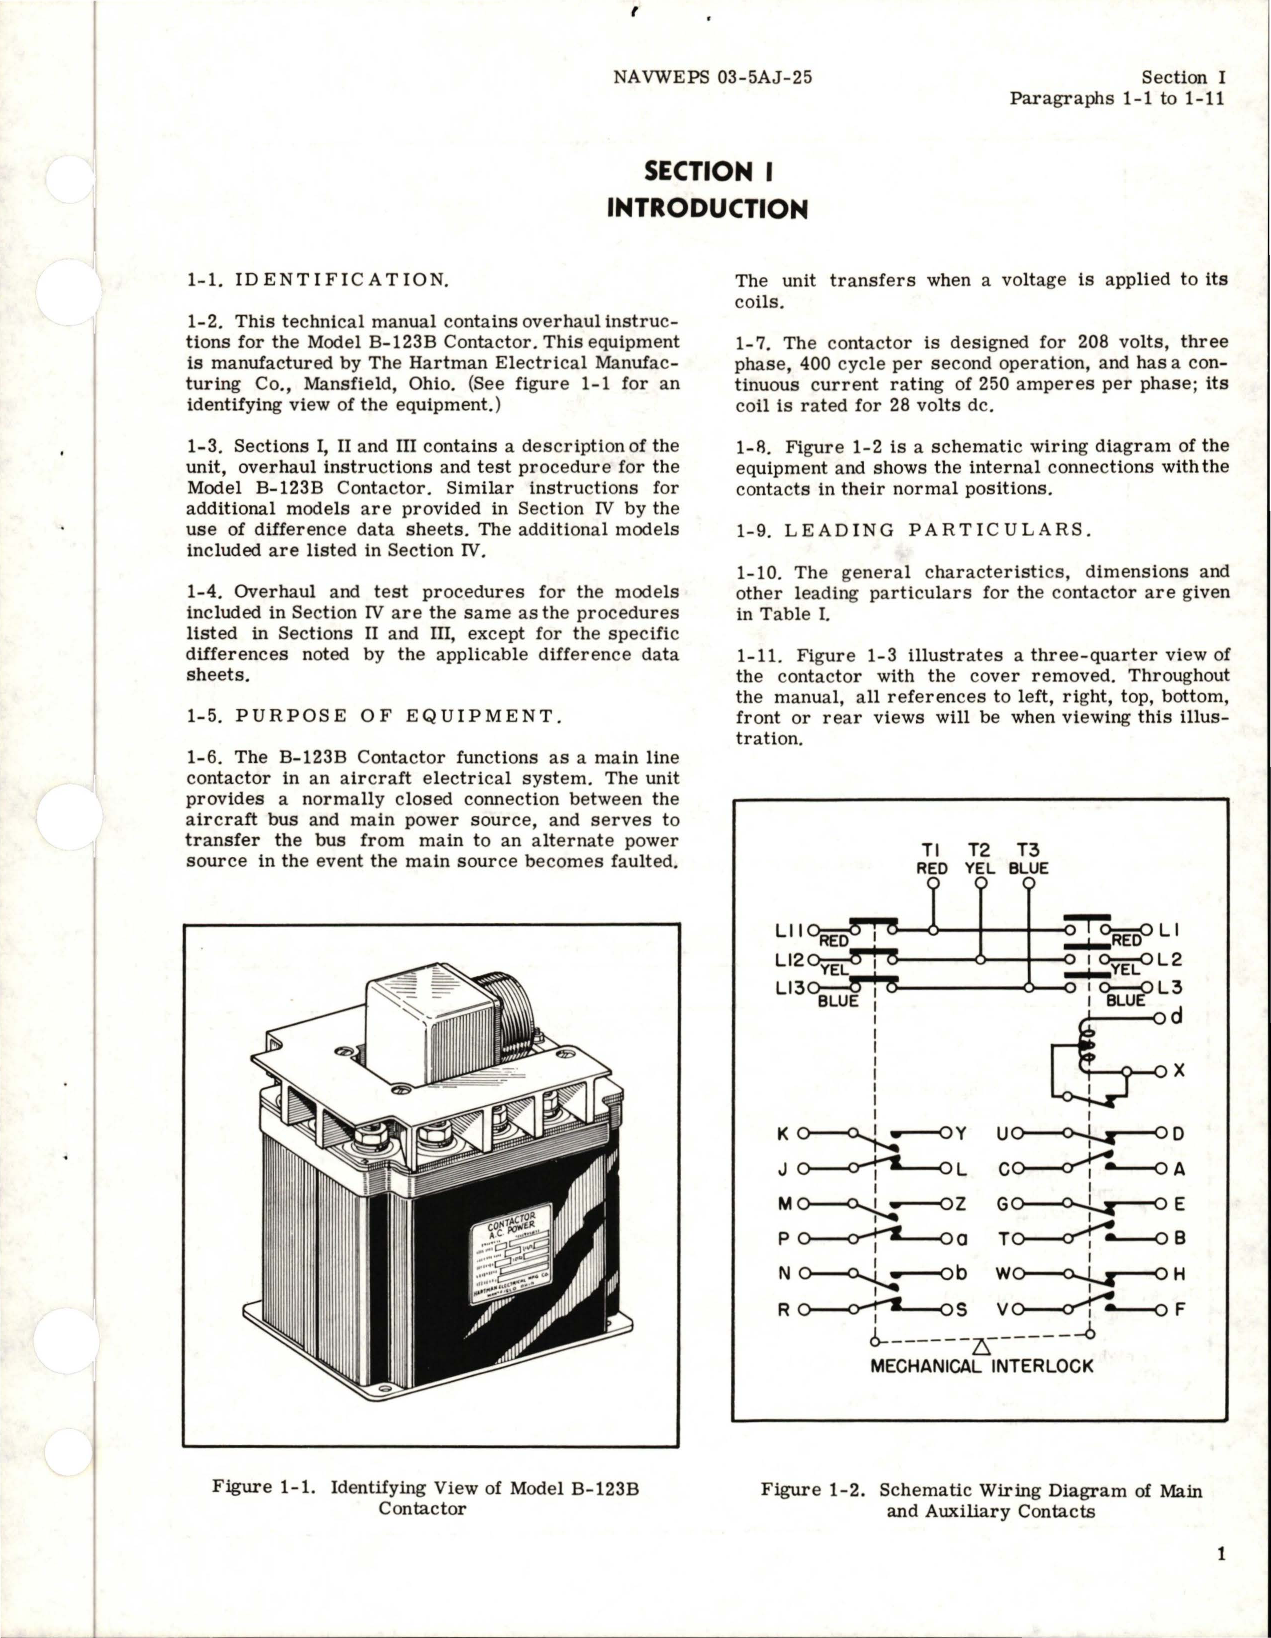 Sample page 5 from AirCorps Library document: Overhaul Instructions for Contactor - Model B-123B and B-123J